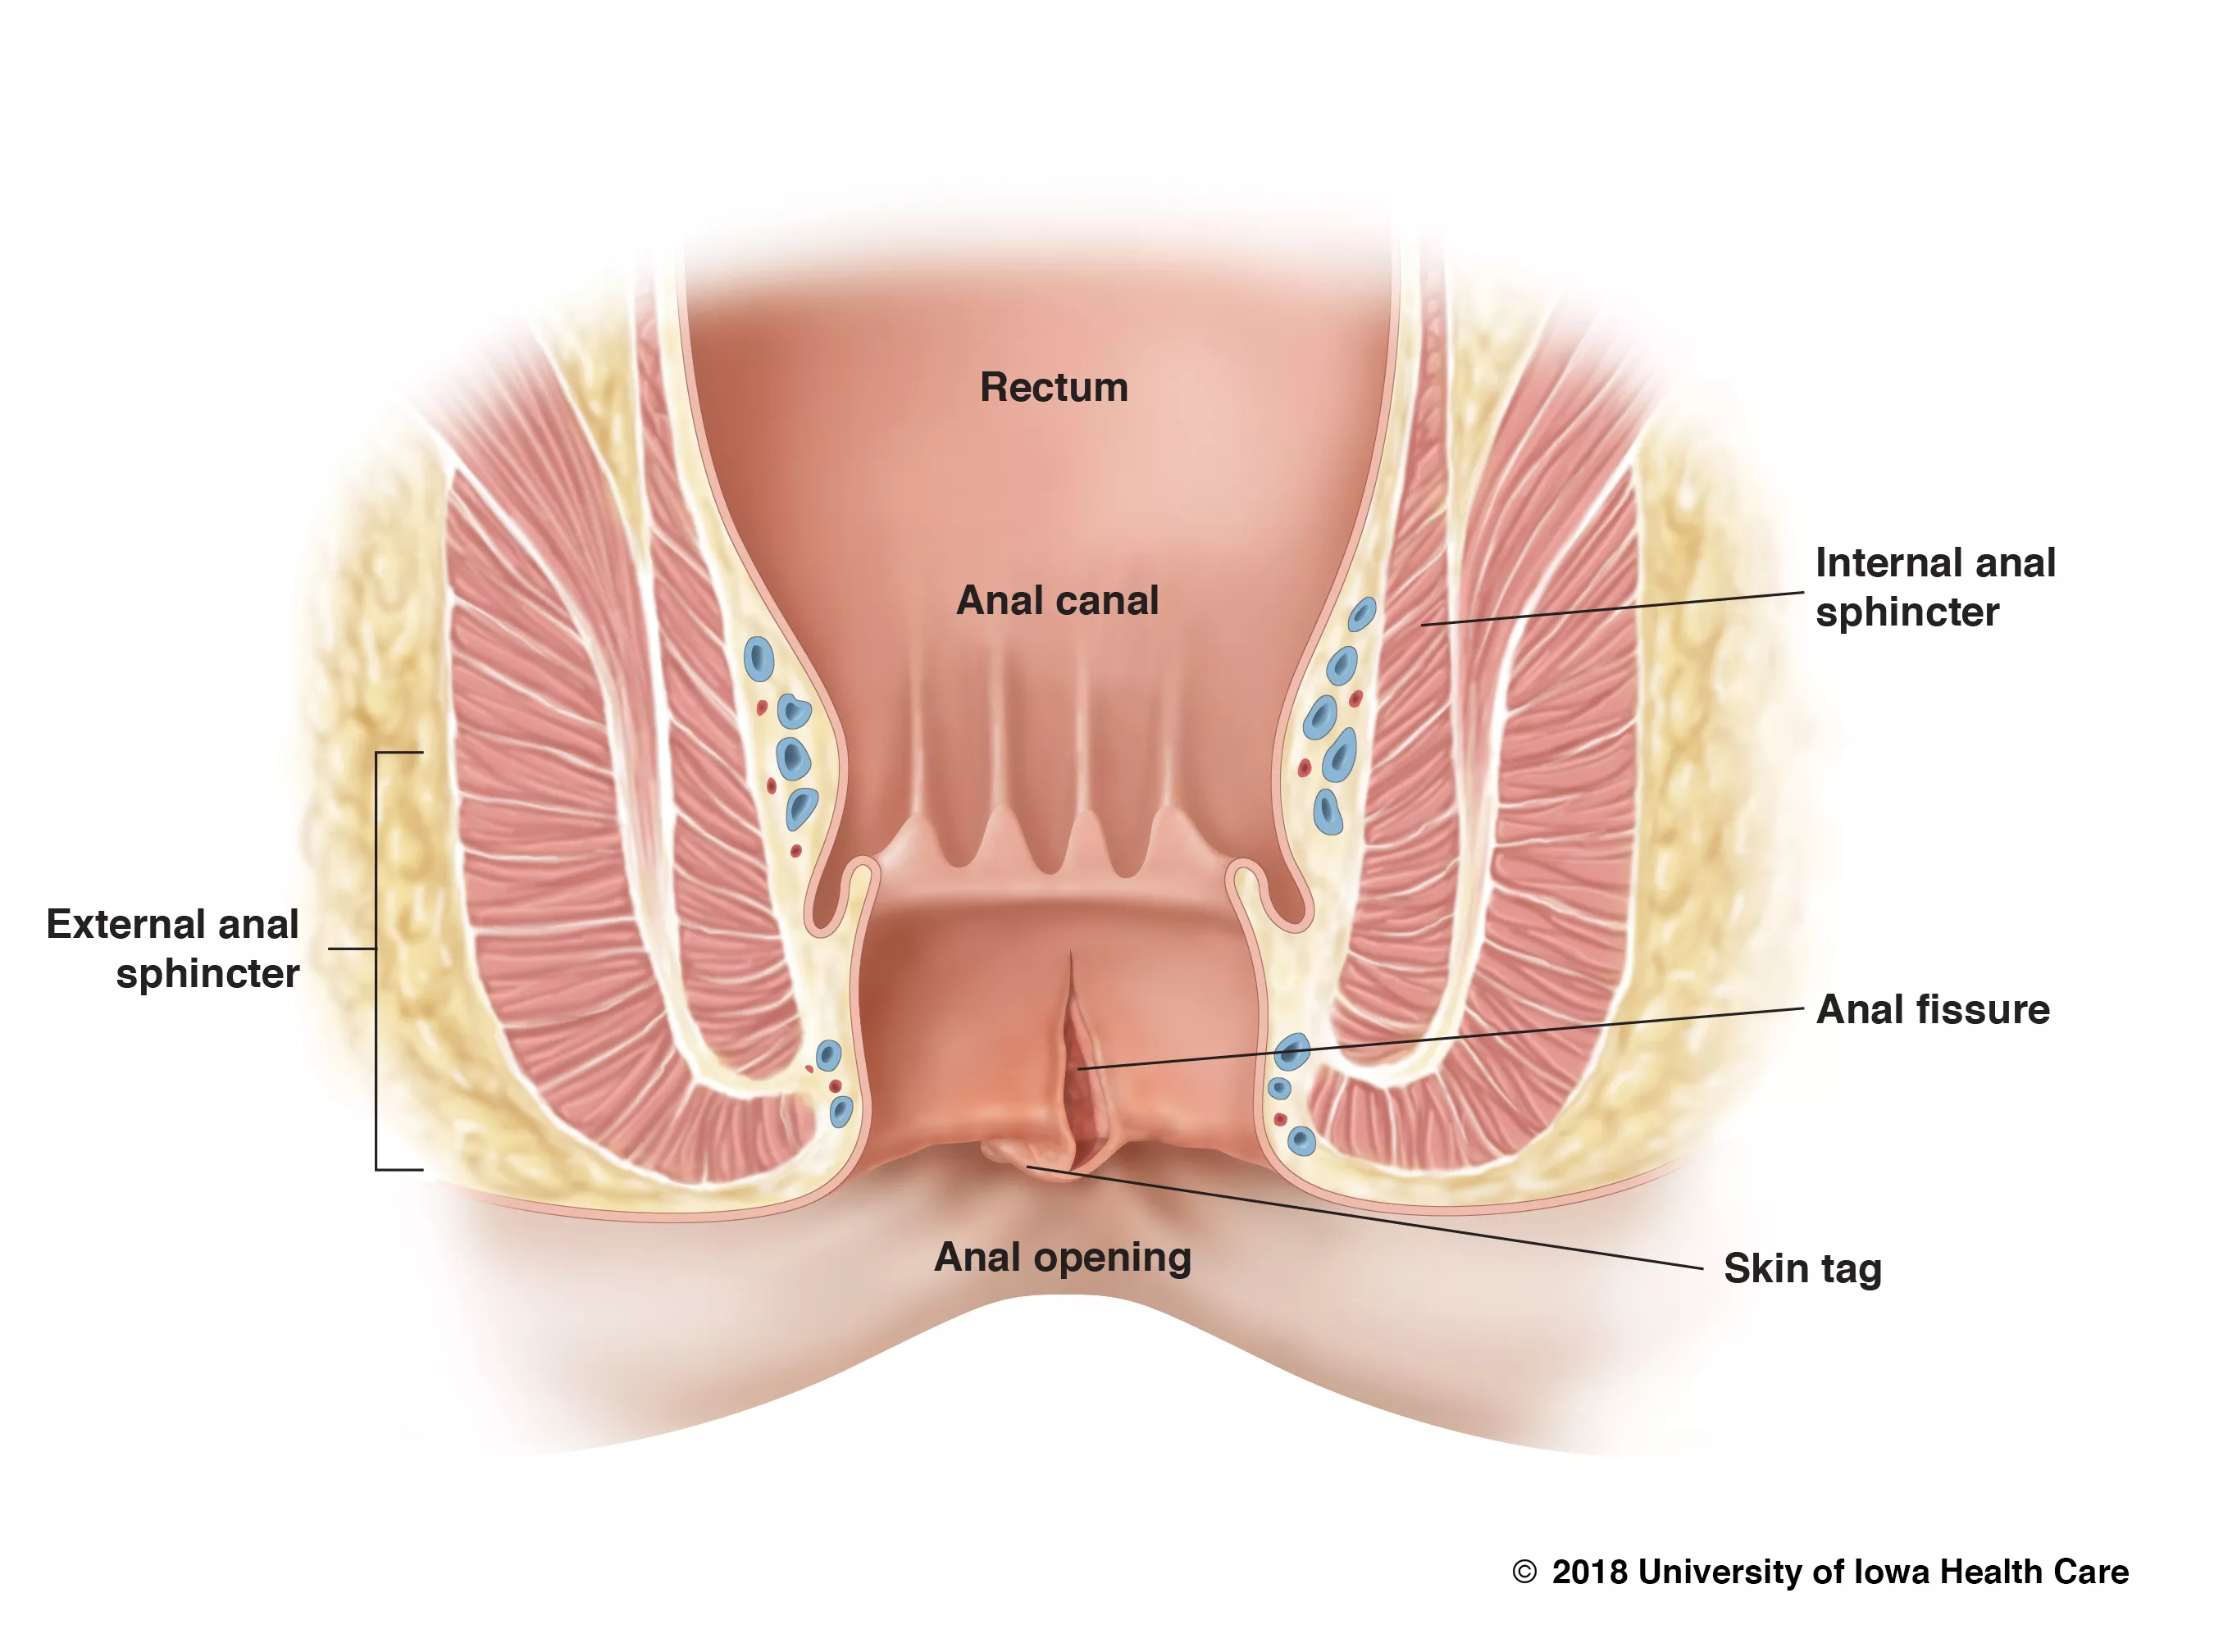 What Is Anal Fissure  ? How Is An Anal Fissure Treated?